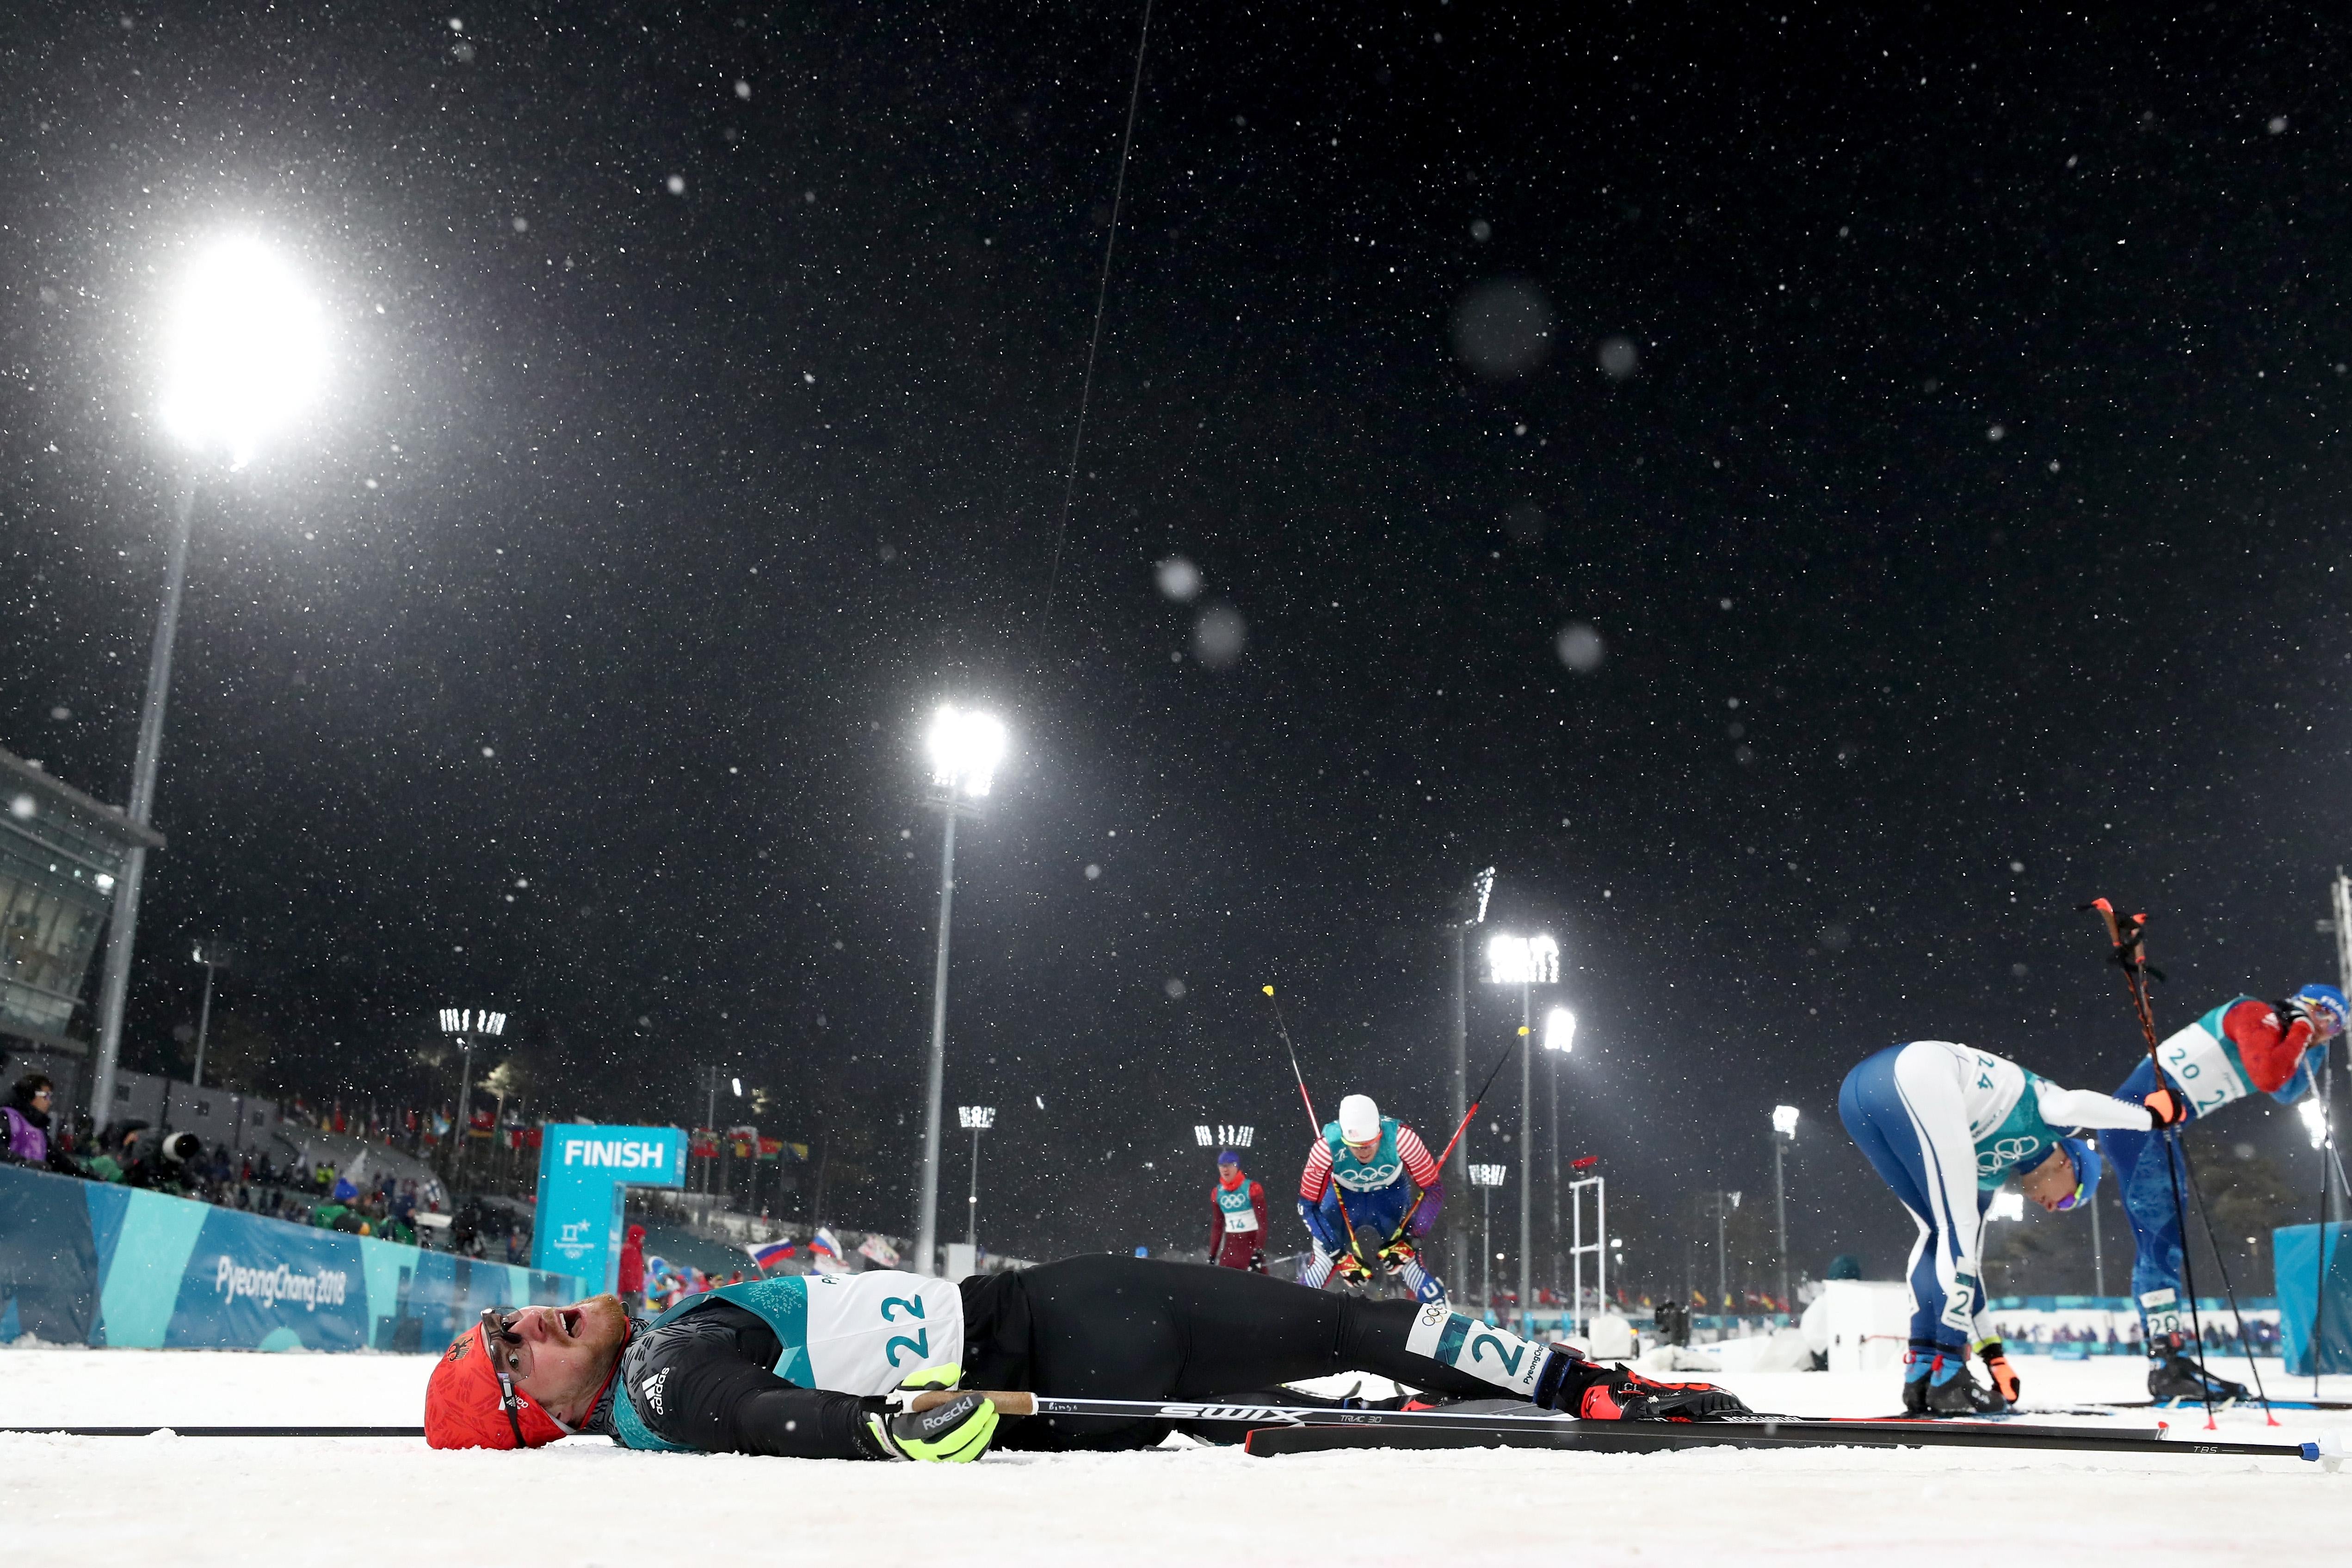 PYEONGCHANG-GUN, SOUTH KOREA - FEBRUARY 13:  Thomas Bing of Germany lays on the snow during the Cross-Country Men's Sprint Classic Quarterfinal on day four of the PyeongChang 2018 Winter Olympic Games at Alpensia Cross-Country Centre on February 13, 2018 in Pyeongchang-gun, South Korea.  (Photo by Al Bello/Getty Images)